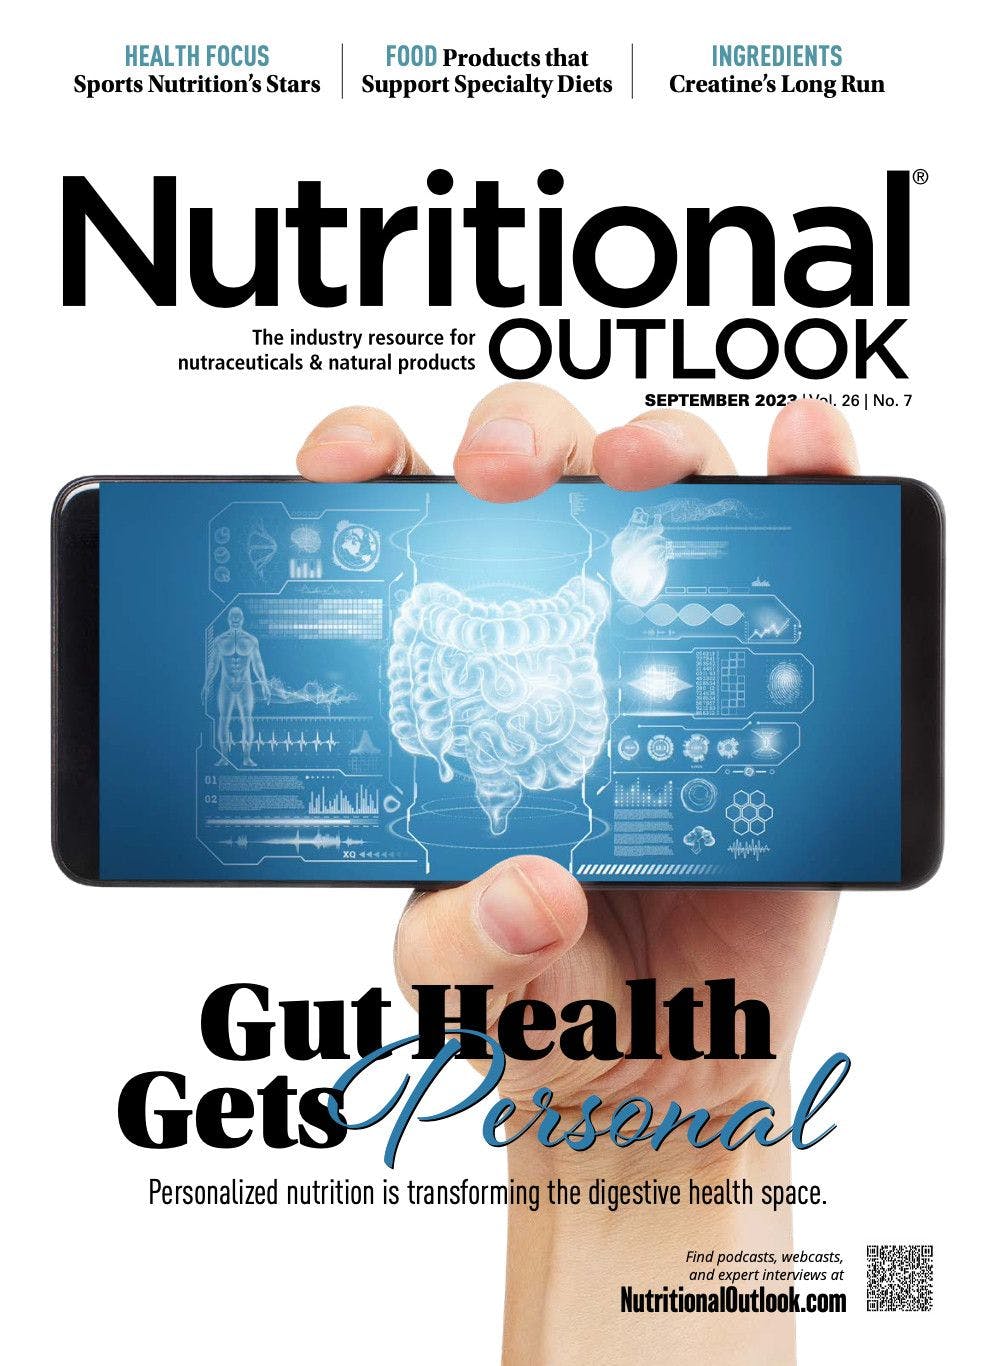 Nutritional Outlook Vol. 26 No. 7